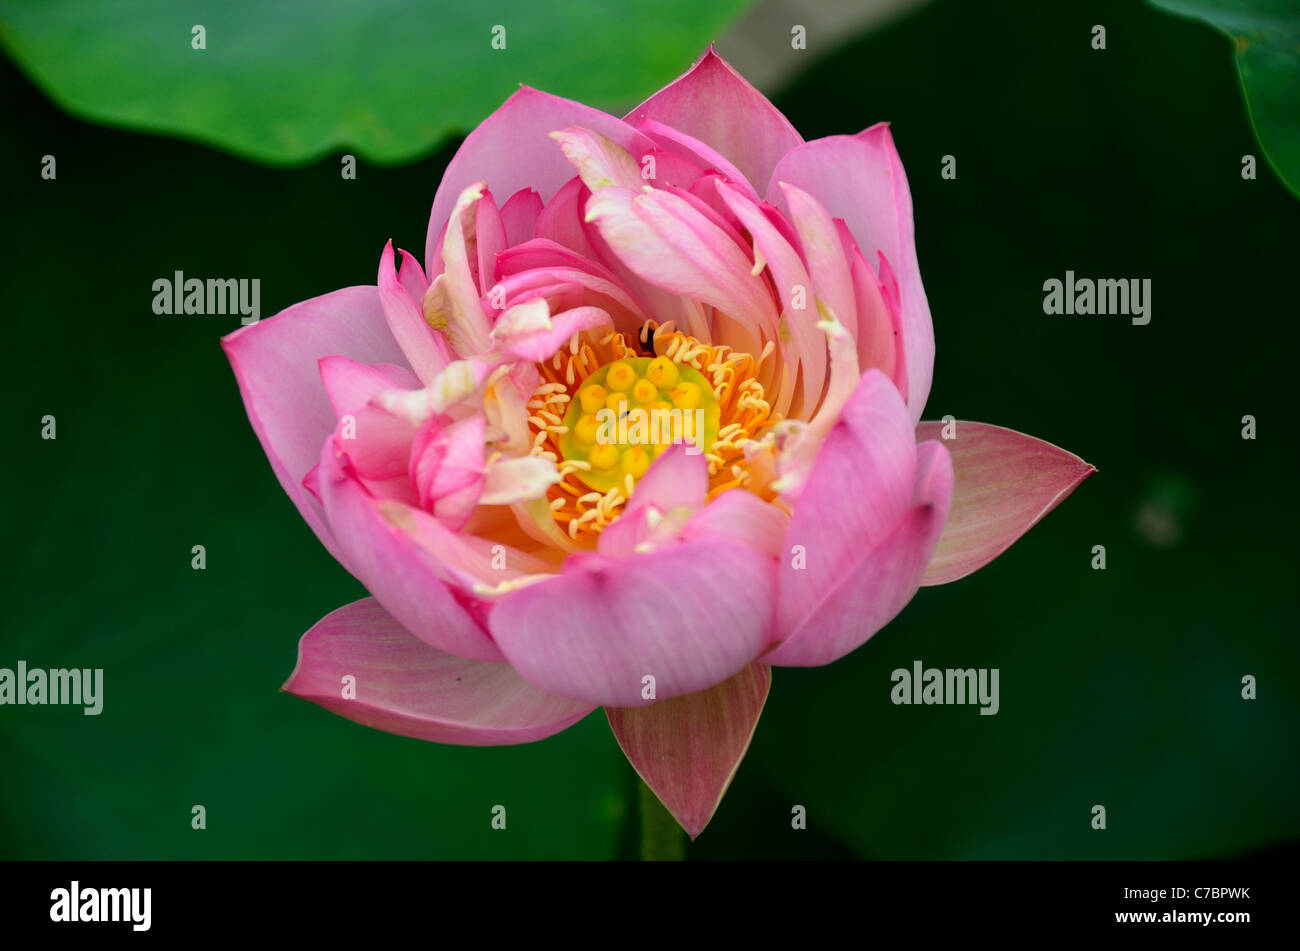 Pink lotus flower with yellow seed pod. Stock Photo